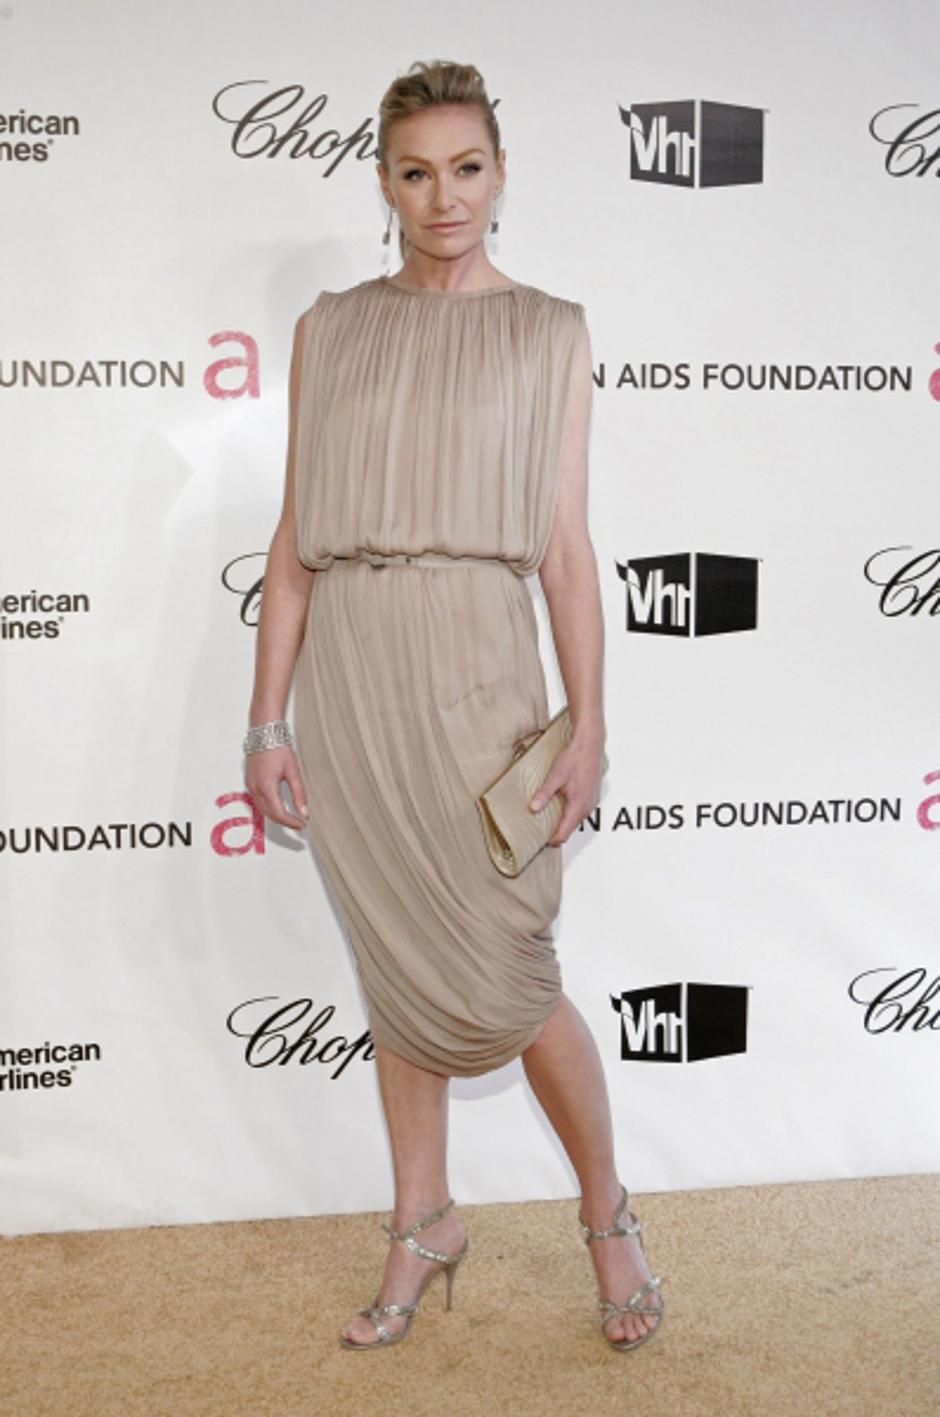 'Portia de Rossi arrives at the 16th Annual Elton John AIDS Foundation Party to celebrate the Academy Awards, the Oscars, at the Pacific Design Center in West Hollywood, California, February 24, 2008.